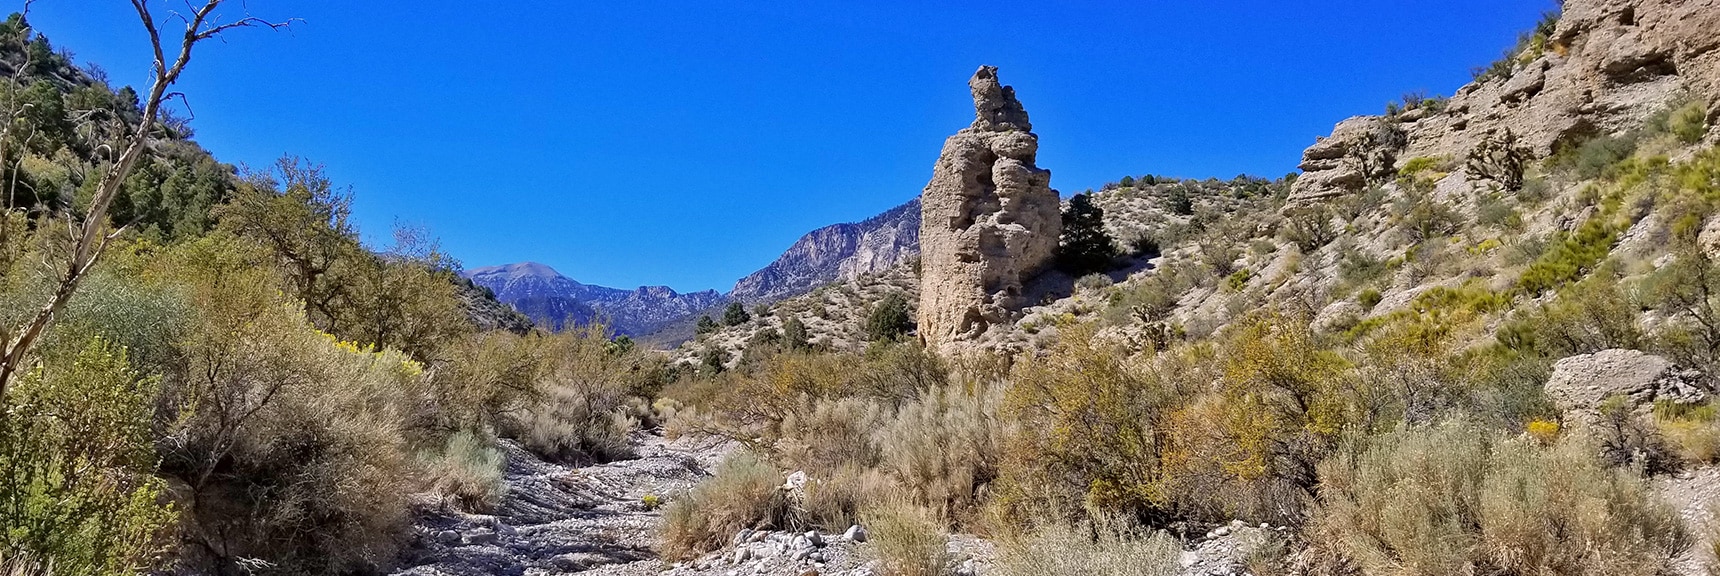 Elaborate Rock Formations in the Canyon. Charleston Peak Visible Ahead | Harris Springs Canyon | Biking from Centennial Hills | Spring Mountains, Nevada